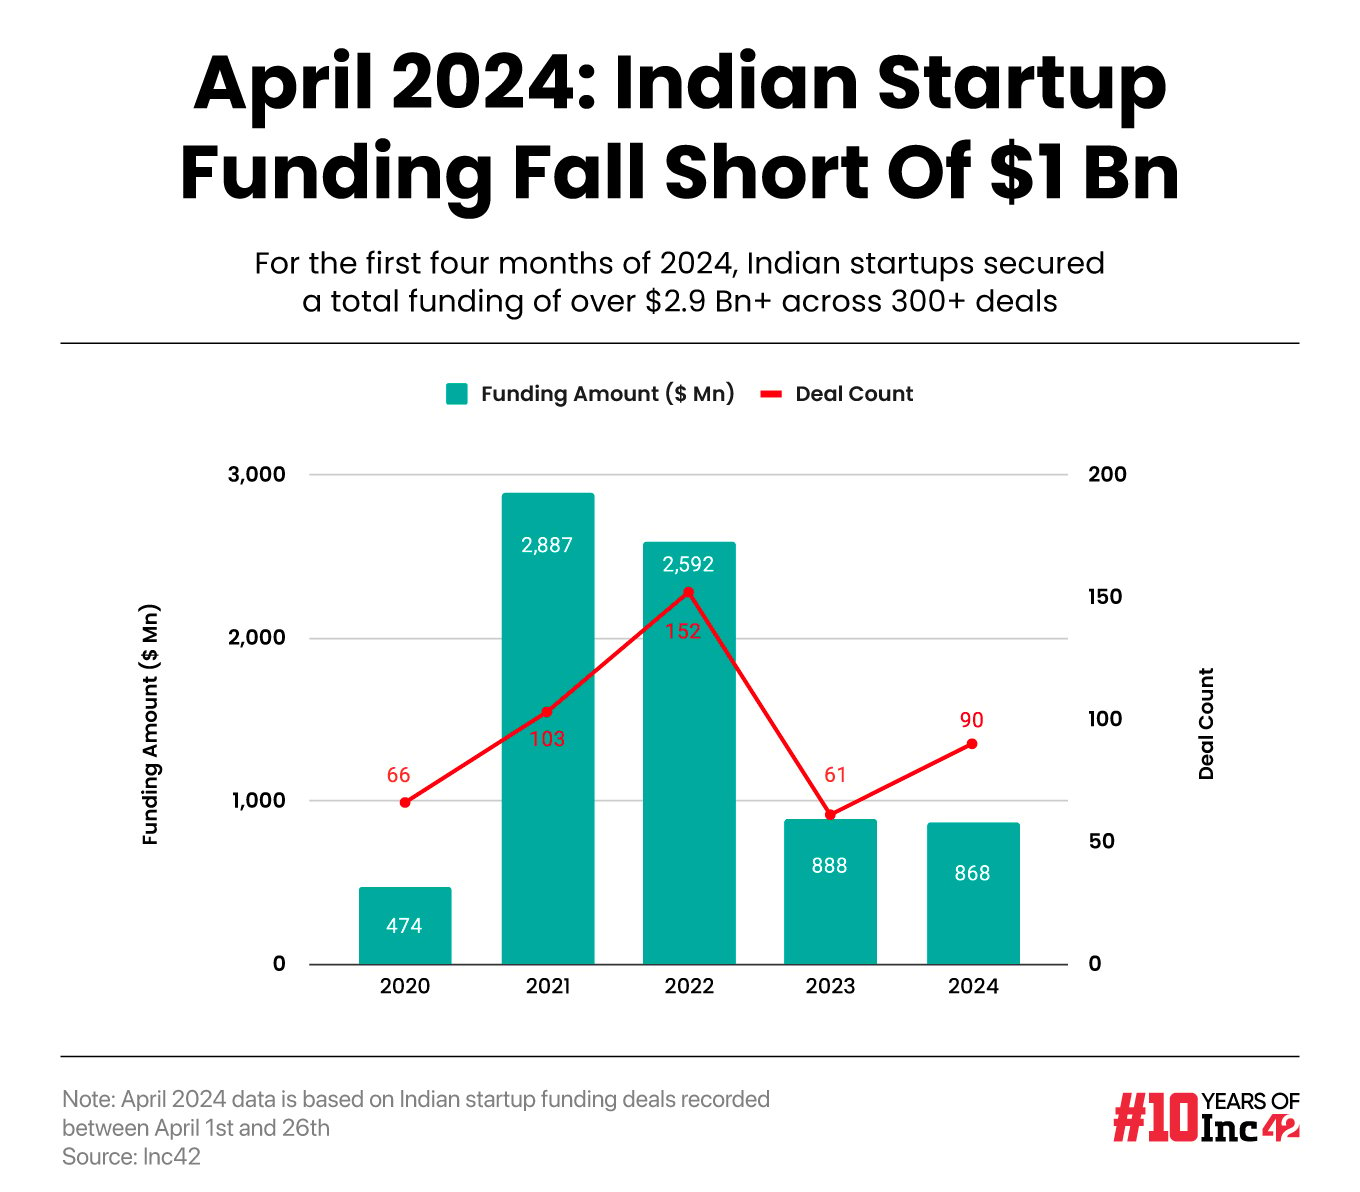 Seed and growth stage startups registered a YoY increase in funding in April after a marginal decline last month. Seed stage startups netted $178 Mn across 46 deals last month, a 286% increase from $46 Mn raised a year ago across 25 deals.